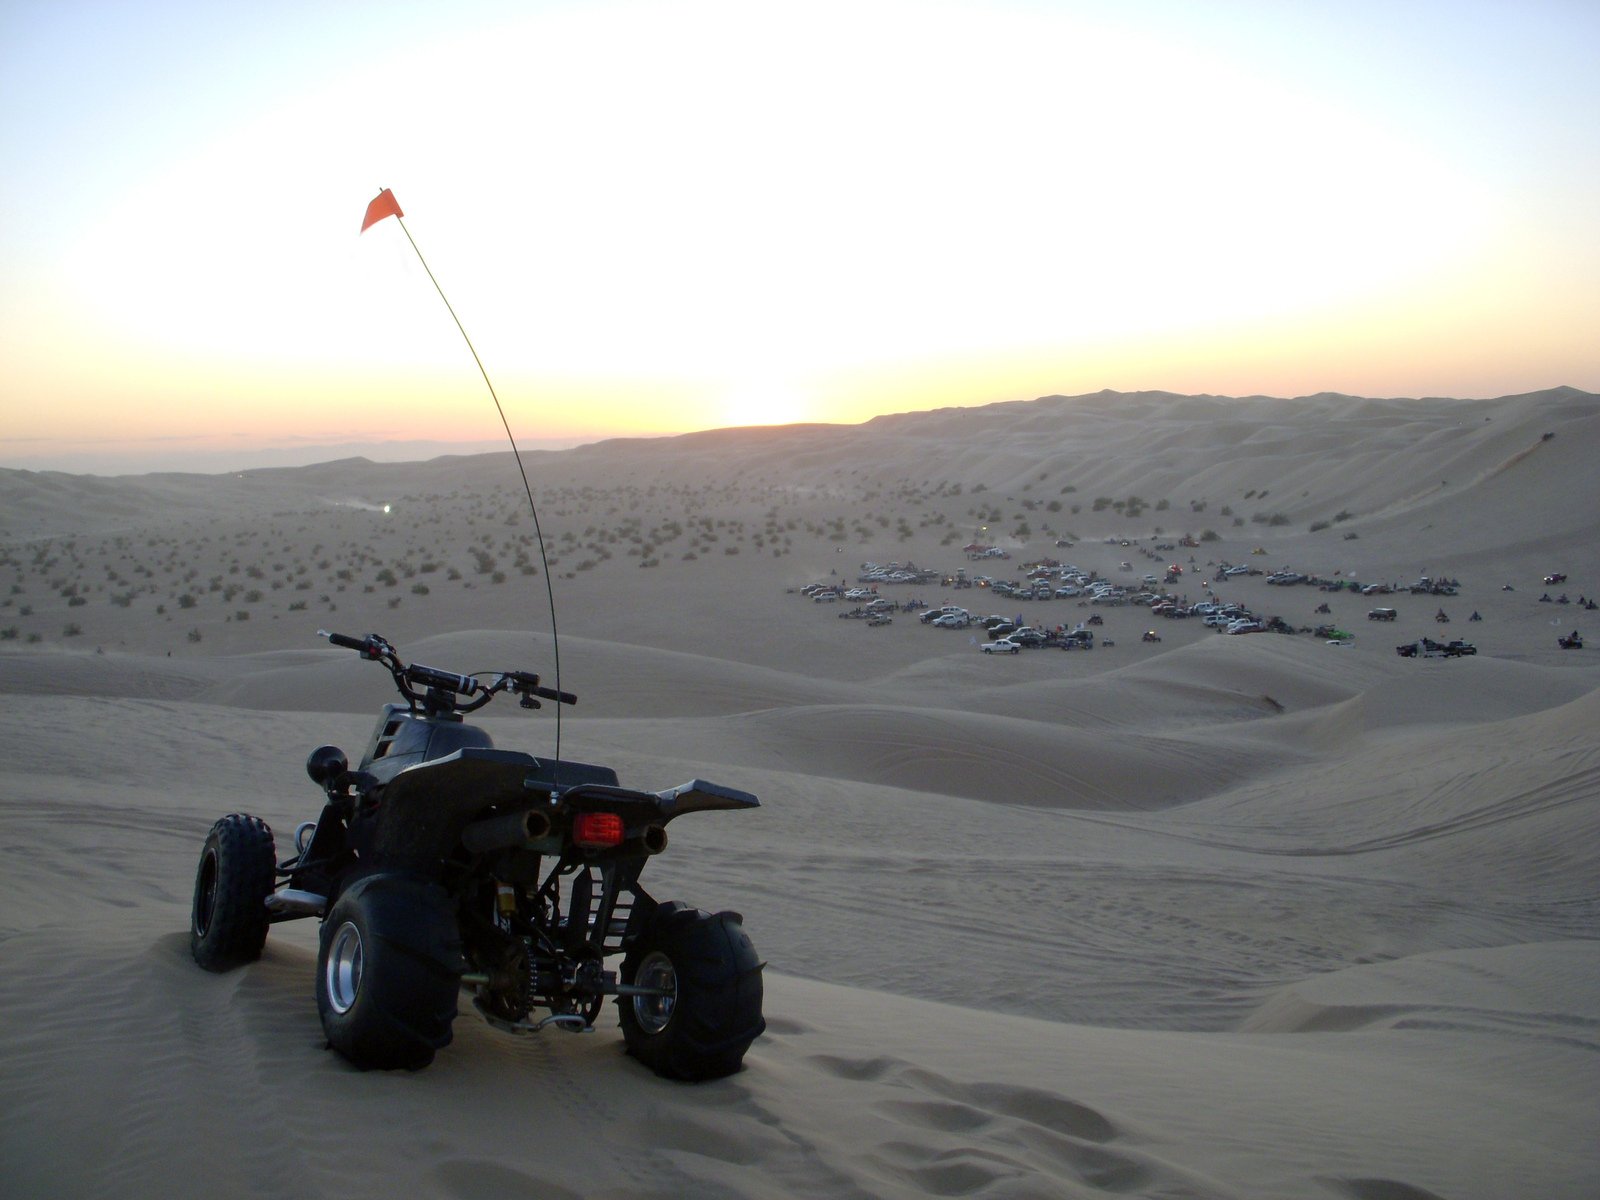 there is a motorcycle in the sand with a kite